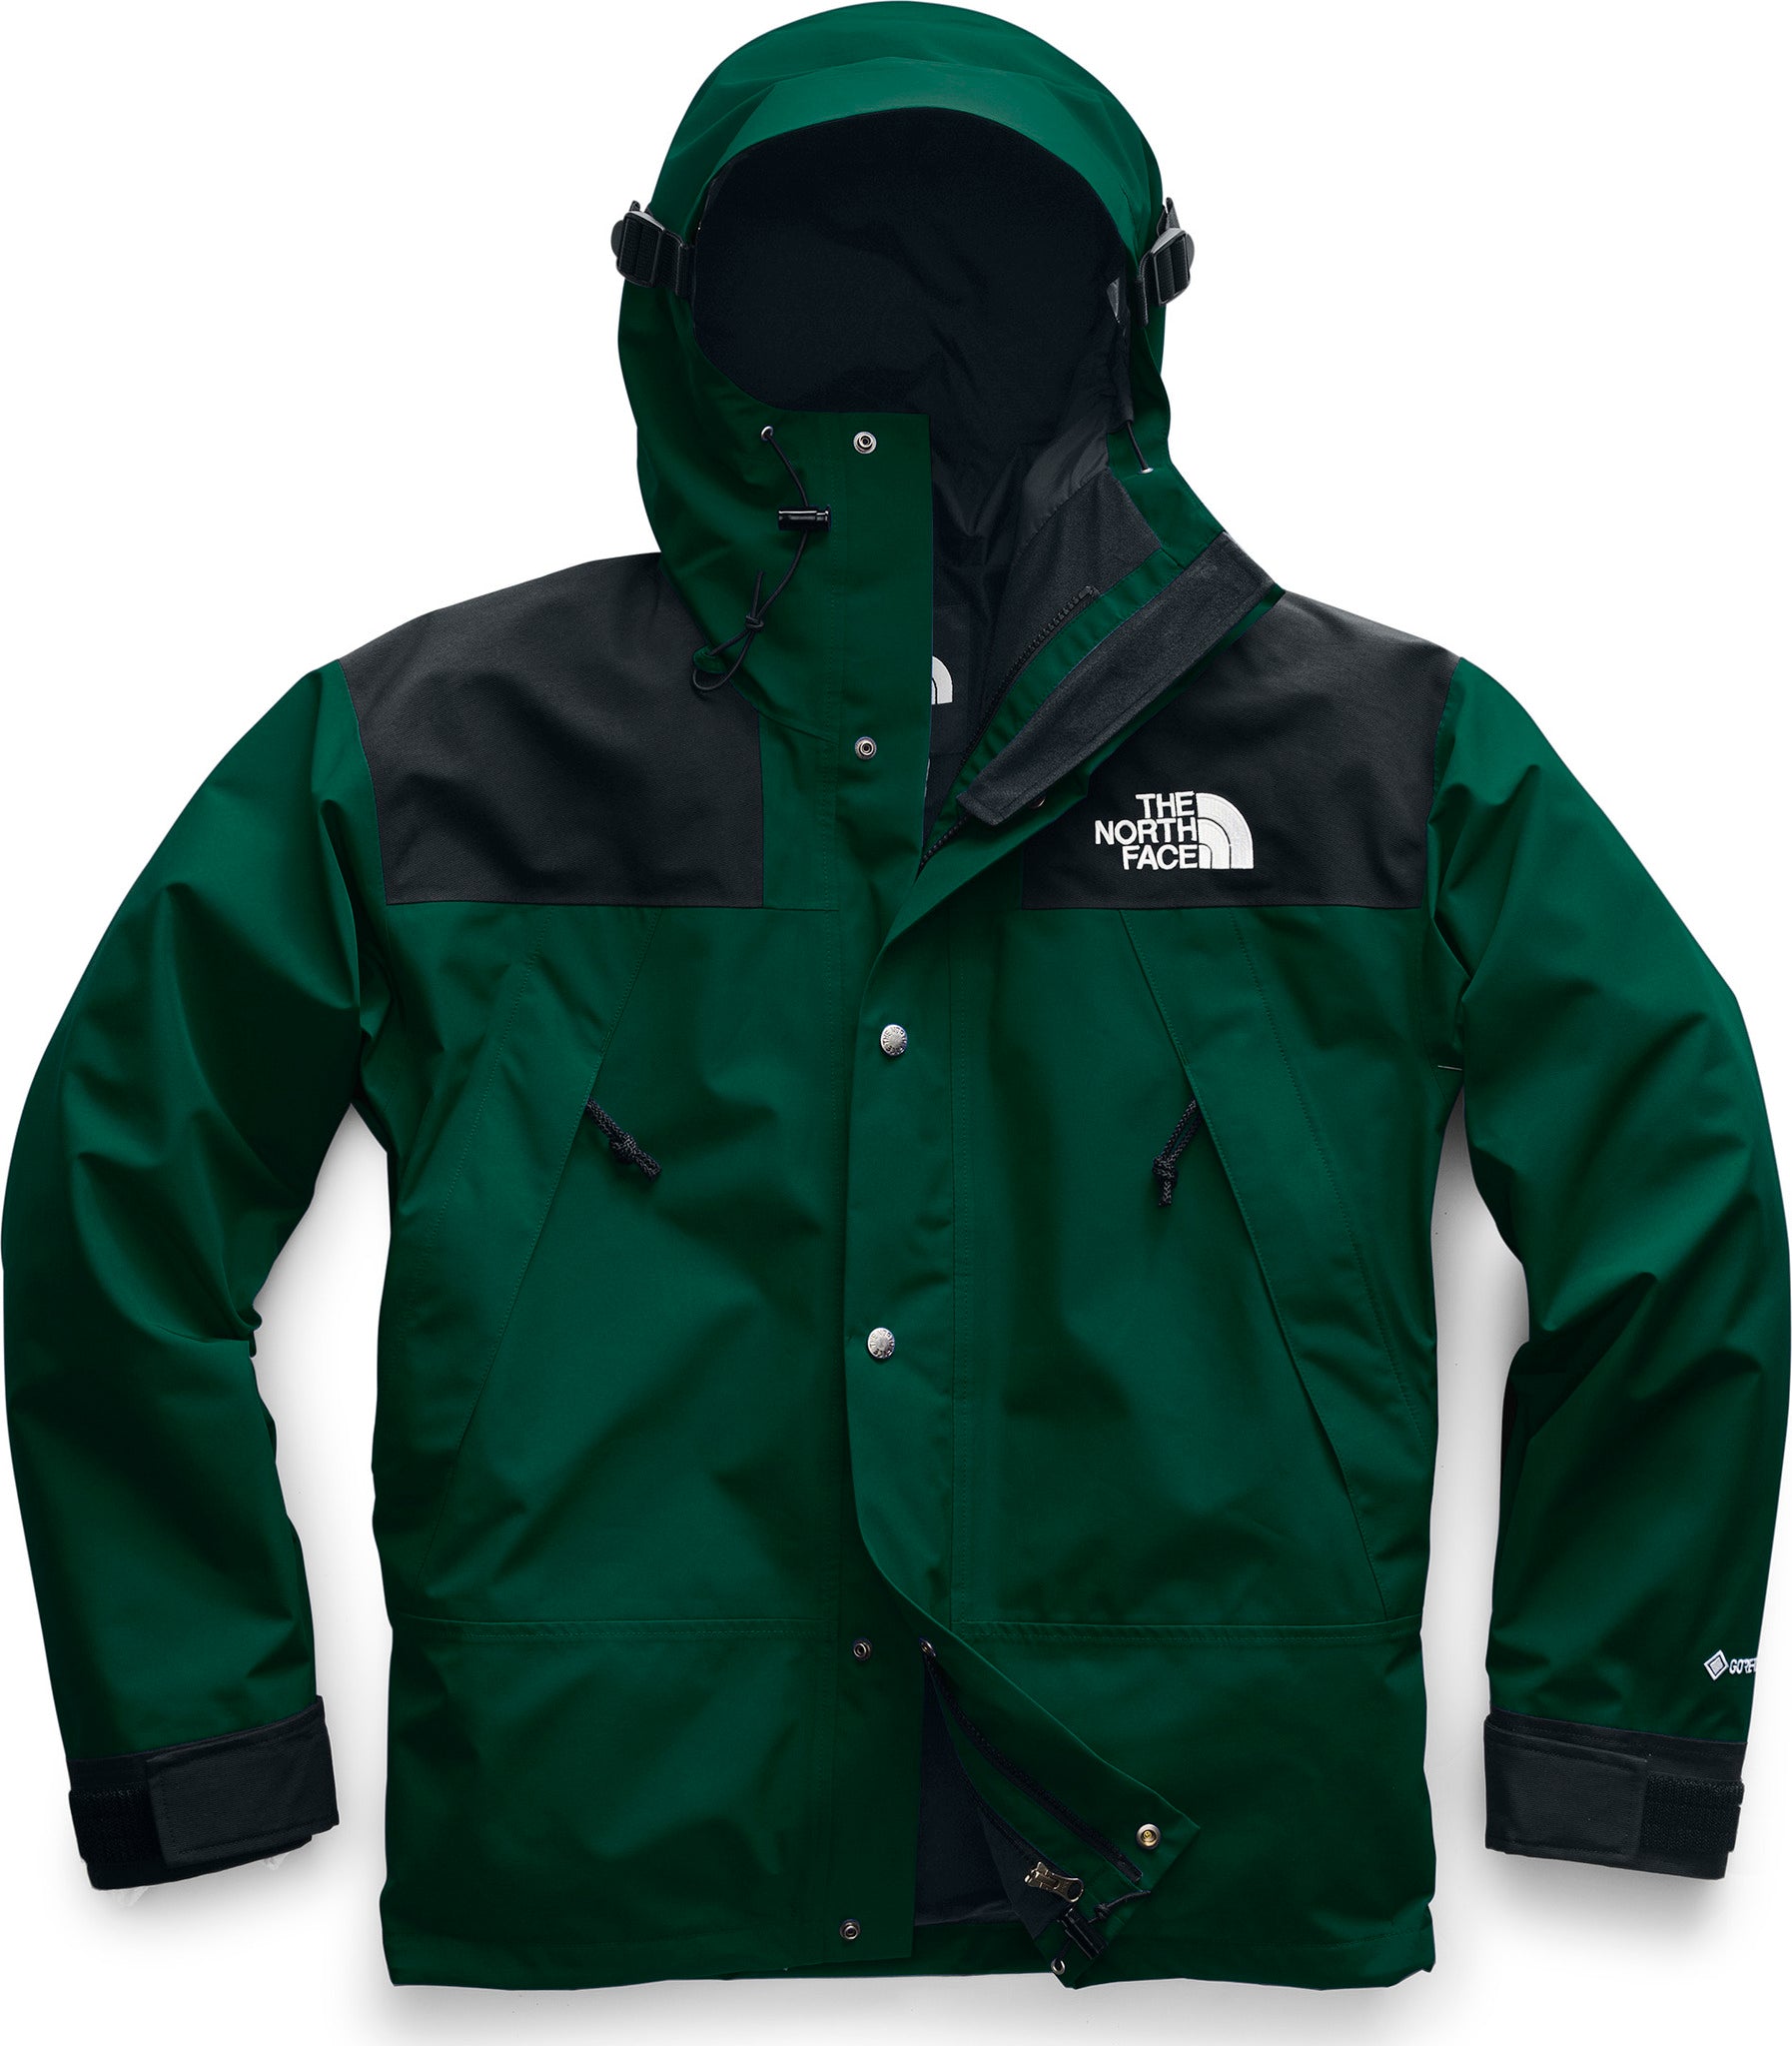 The North Face 1990 Mountain Jacket Gore-Tex II - Men's | The Last Hunt